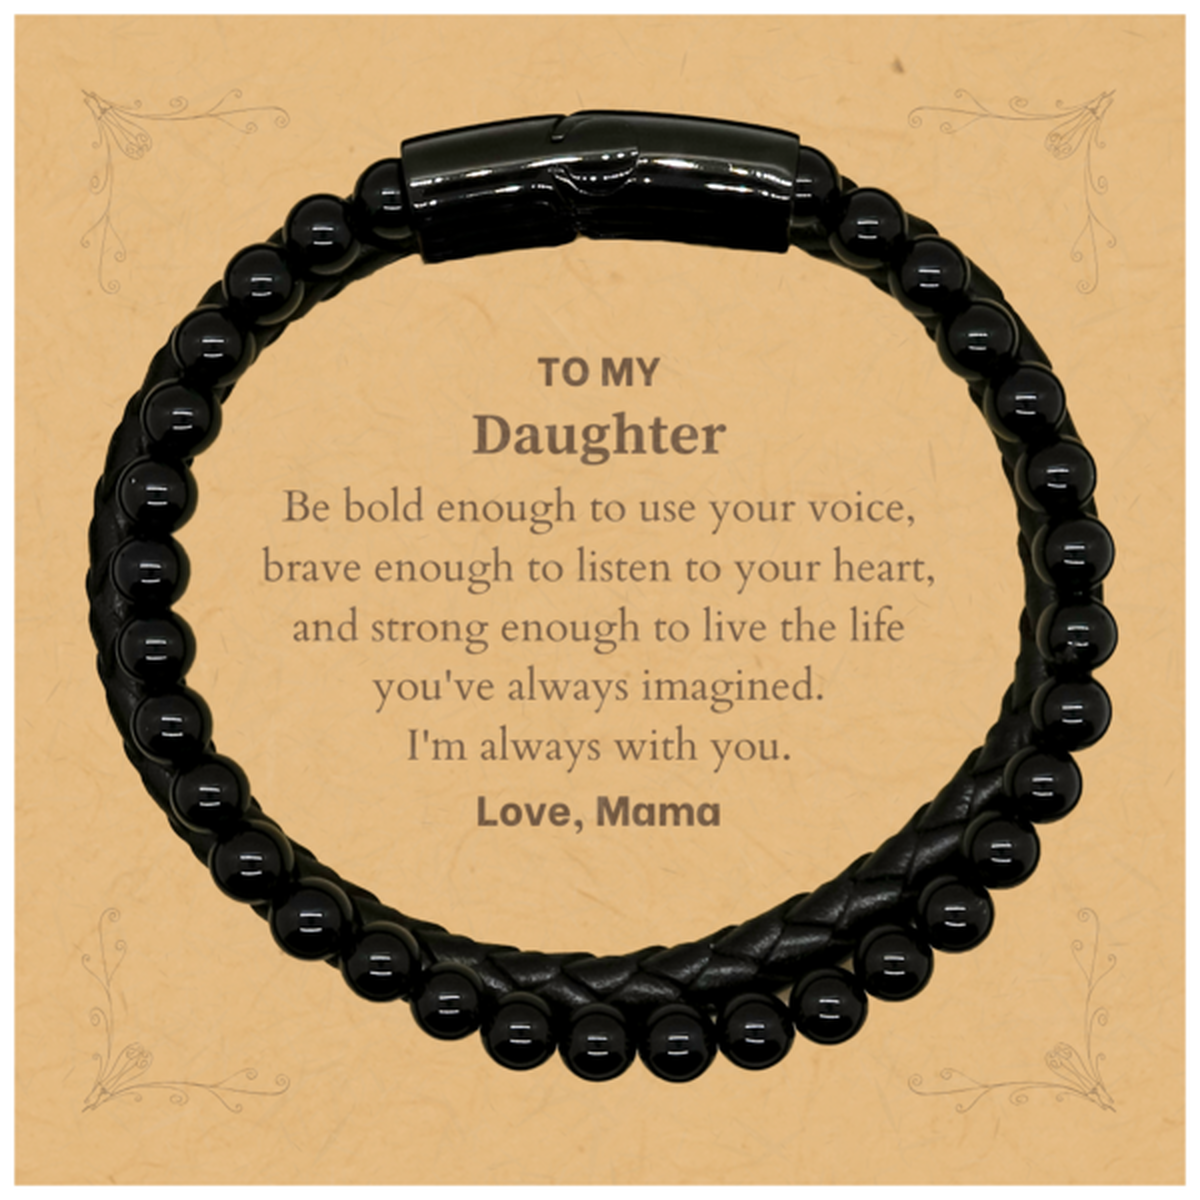 Keepsake Daughter Stone Leather Bracelets Gift Idea Graduation Christmas Birthday Daughter from Mama, Daughter Be bold enough to use your voice, brave enough to listen to your heart. Love, Mama